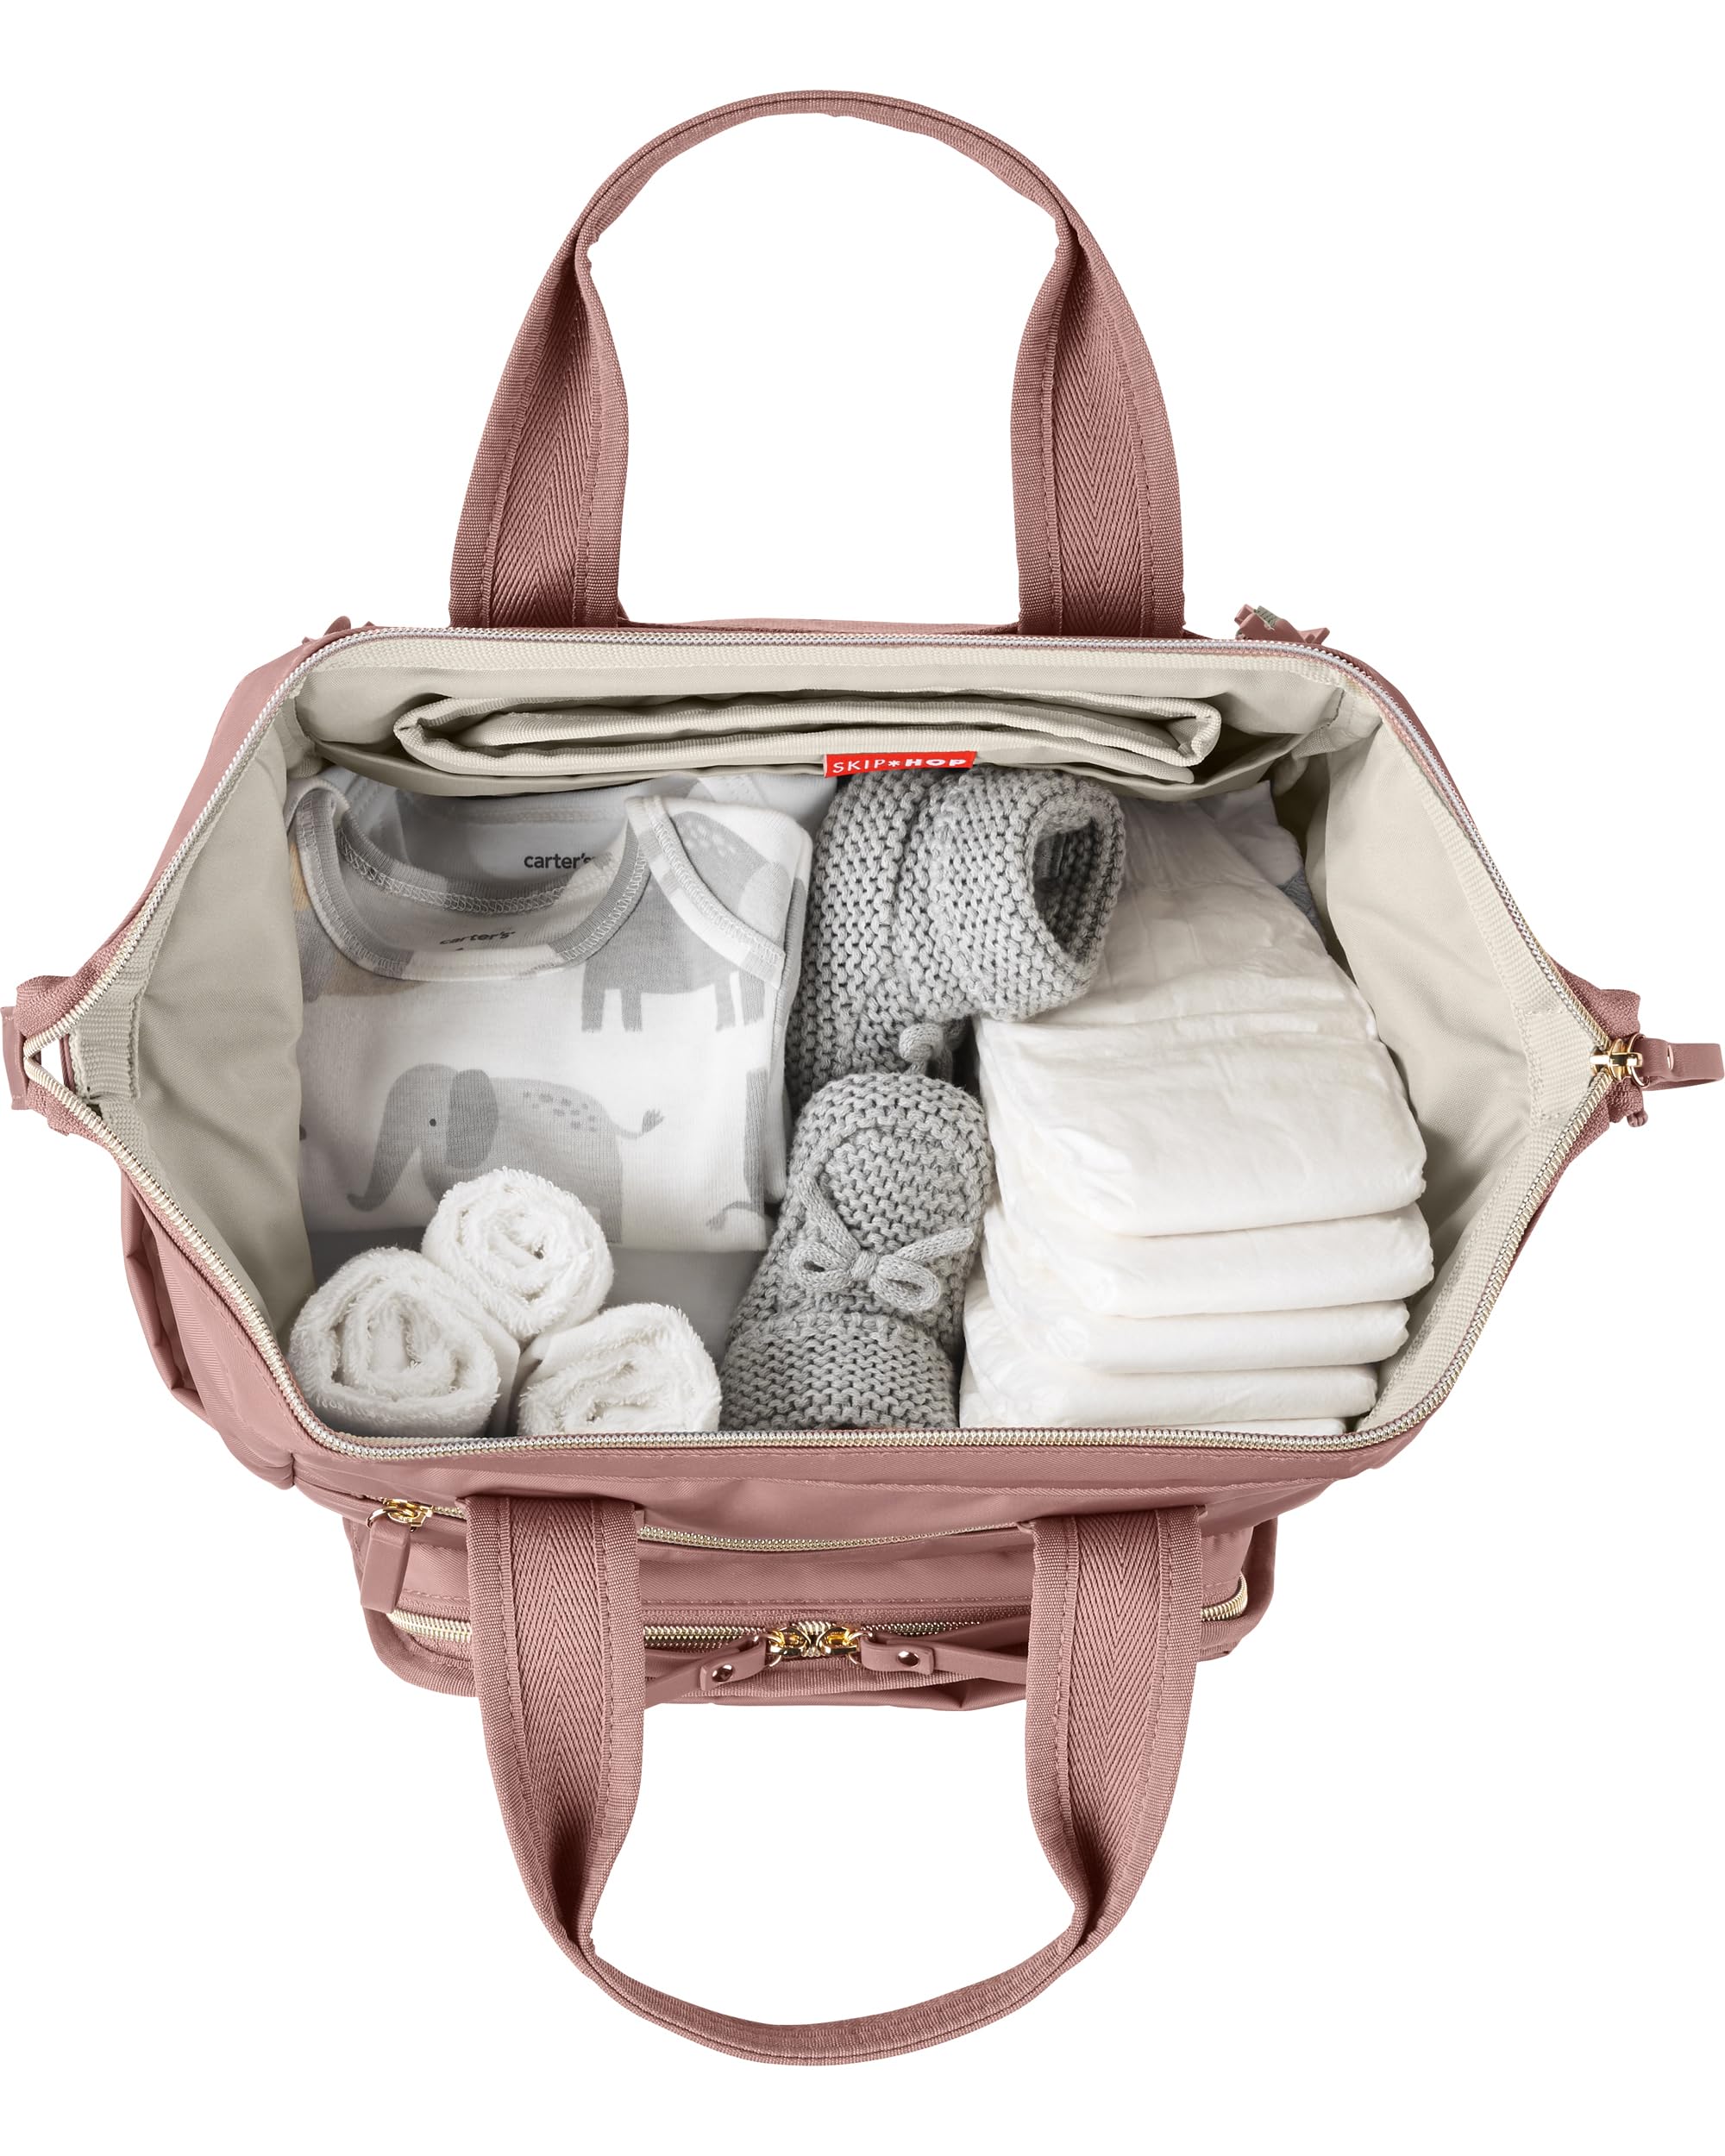 Skip Hop Diaper Bag Backpack: Mainframe Large Capacity Wide Open Structure with Changing Pad & Stroller Attachement, Dusty Rose